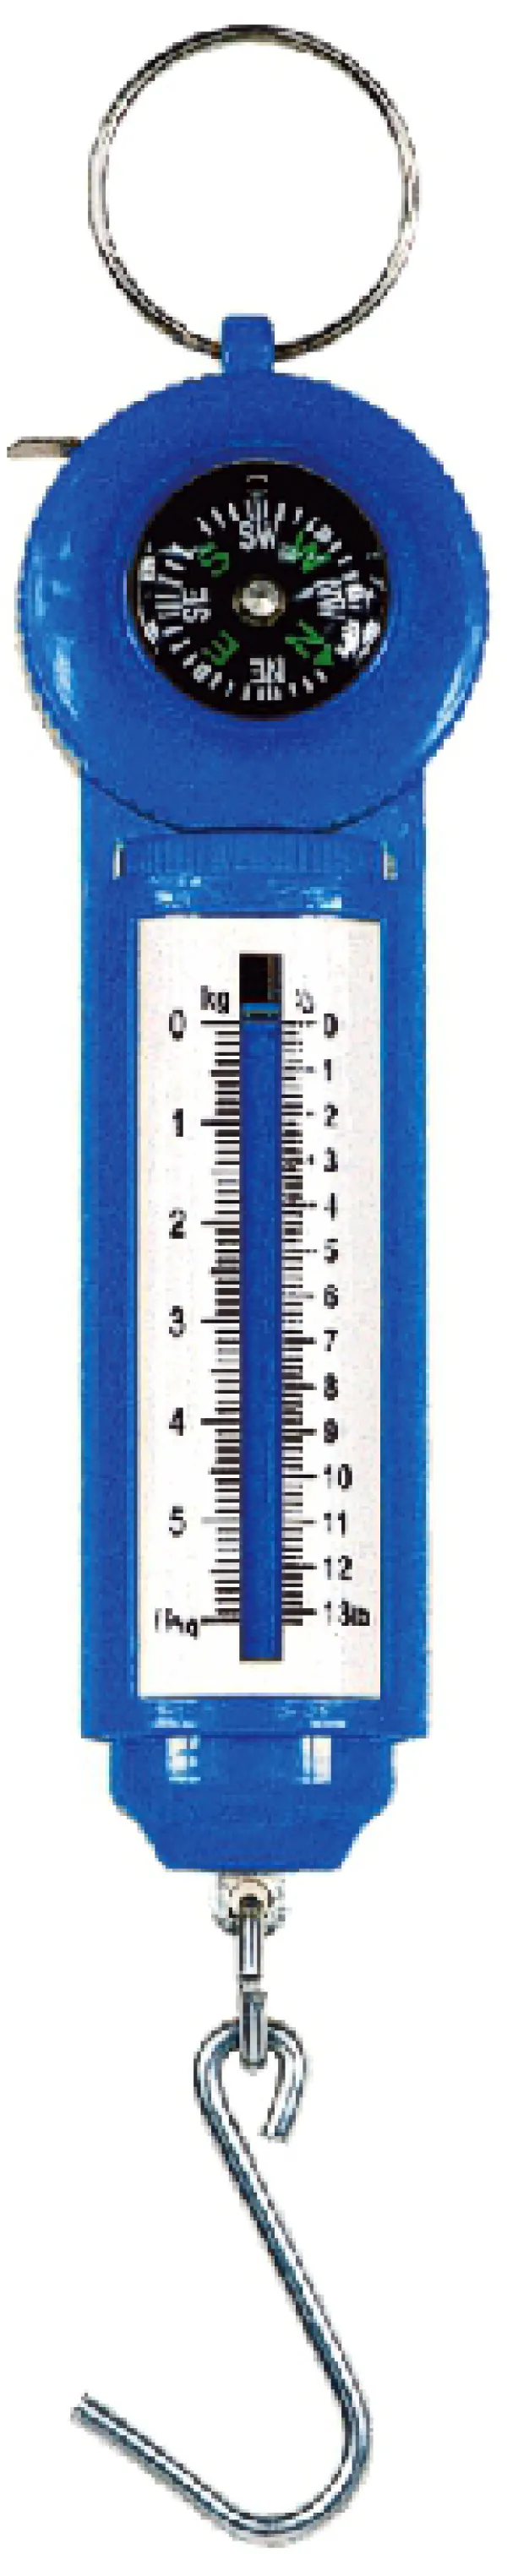 KONGER 6kg Scale with Measure And Compass